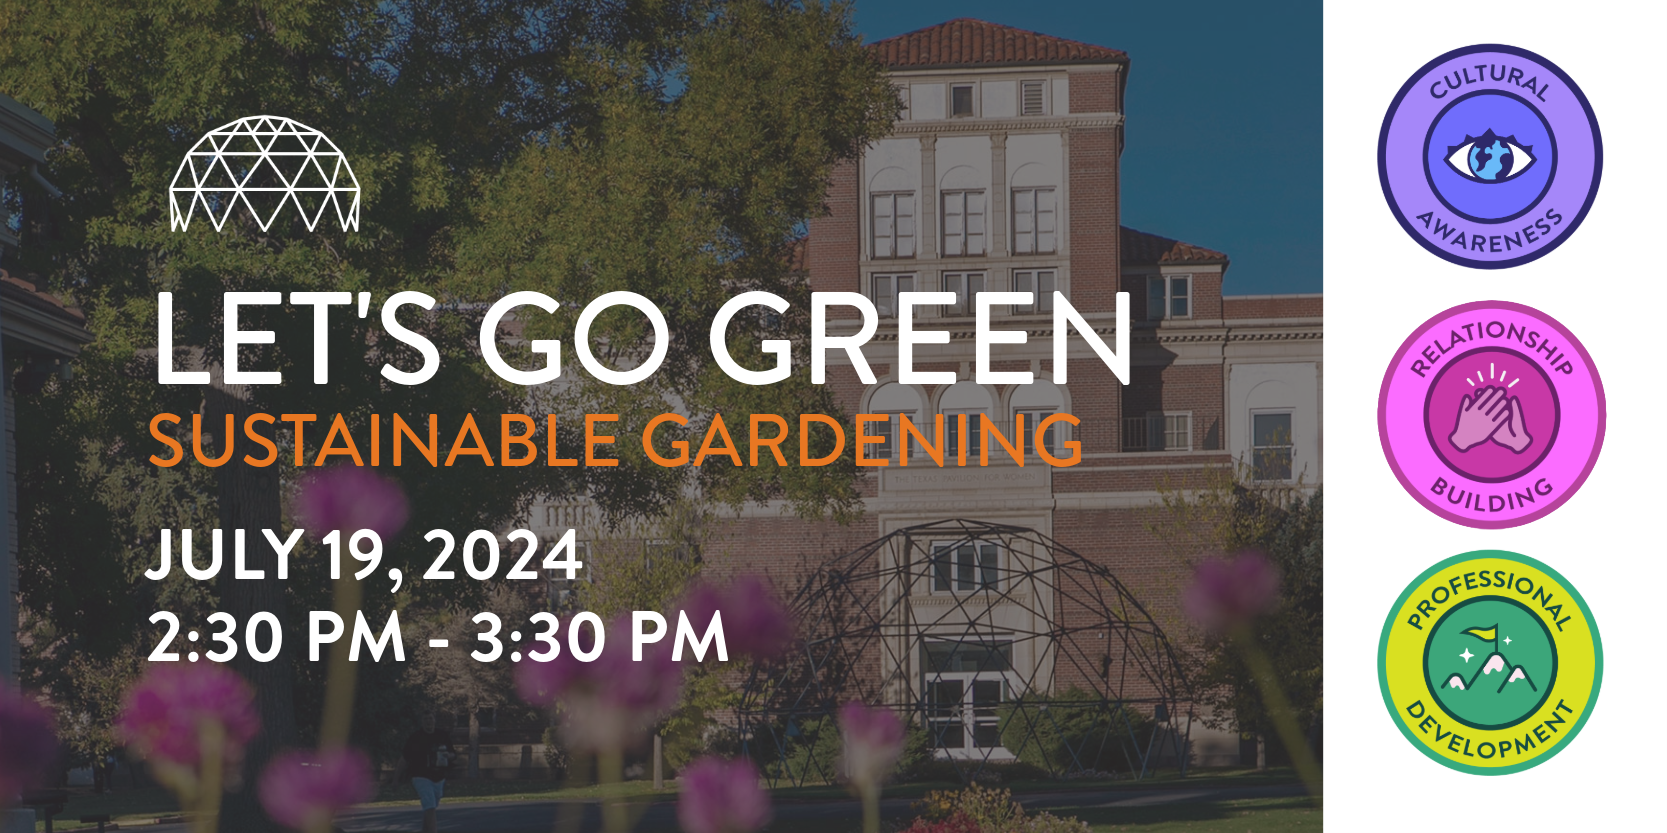 Let's Go Green: Sustainable Gardening